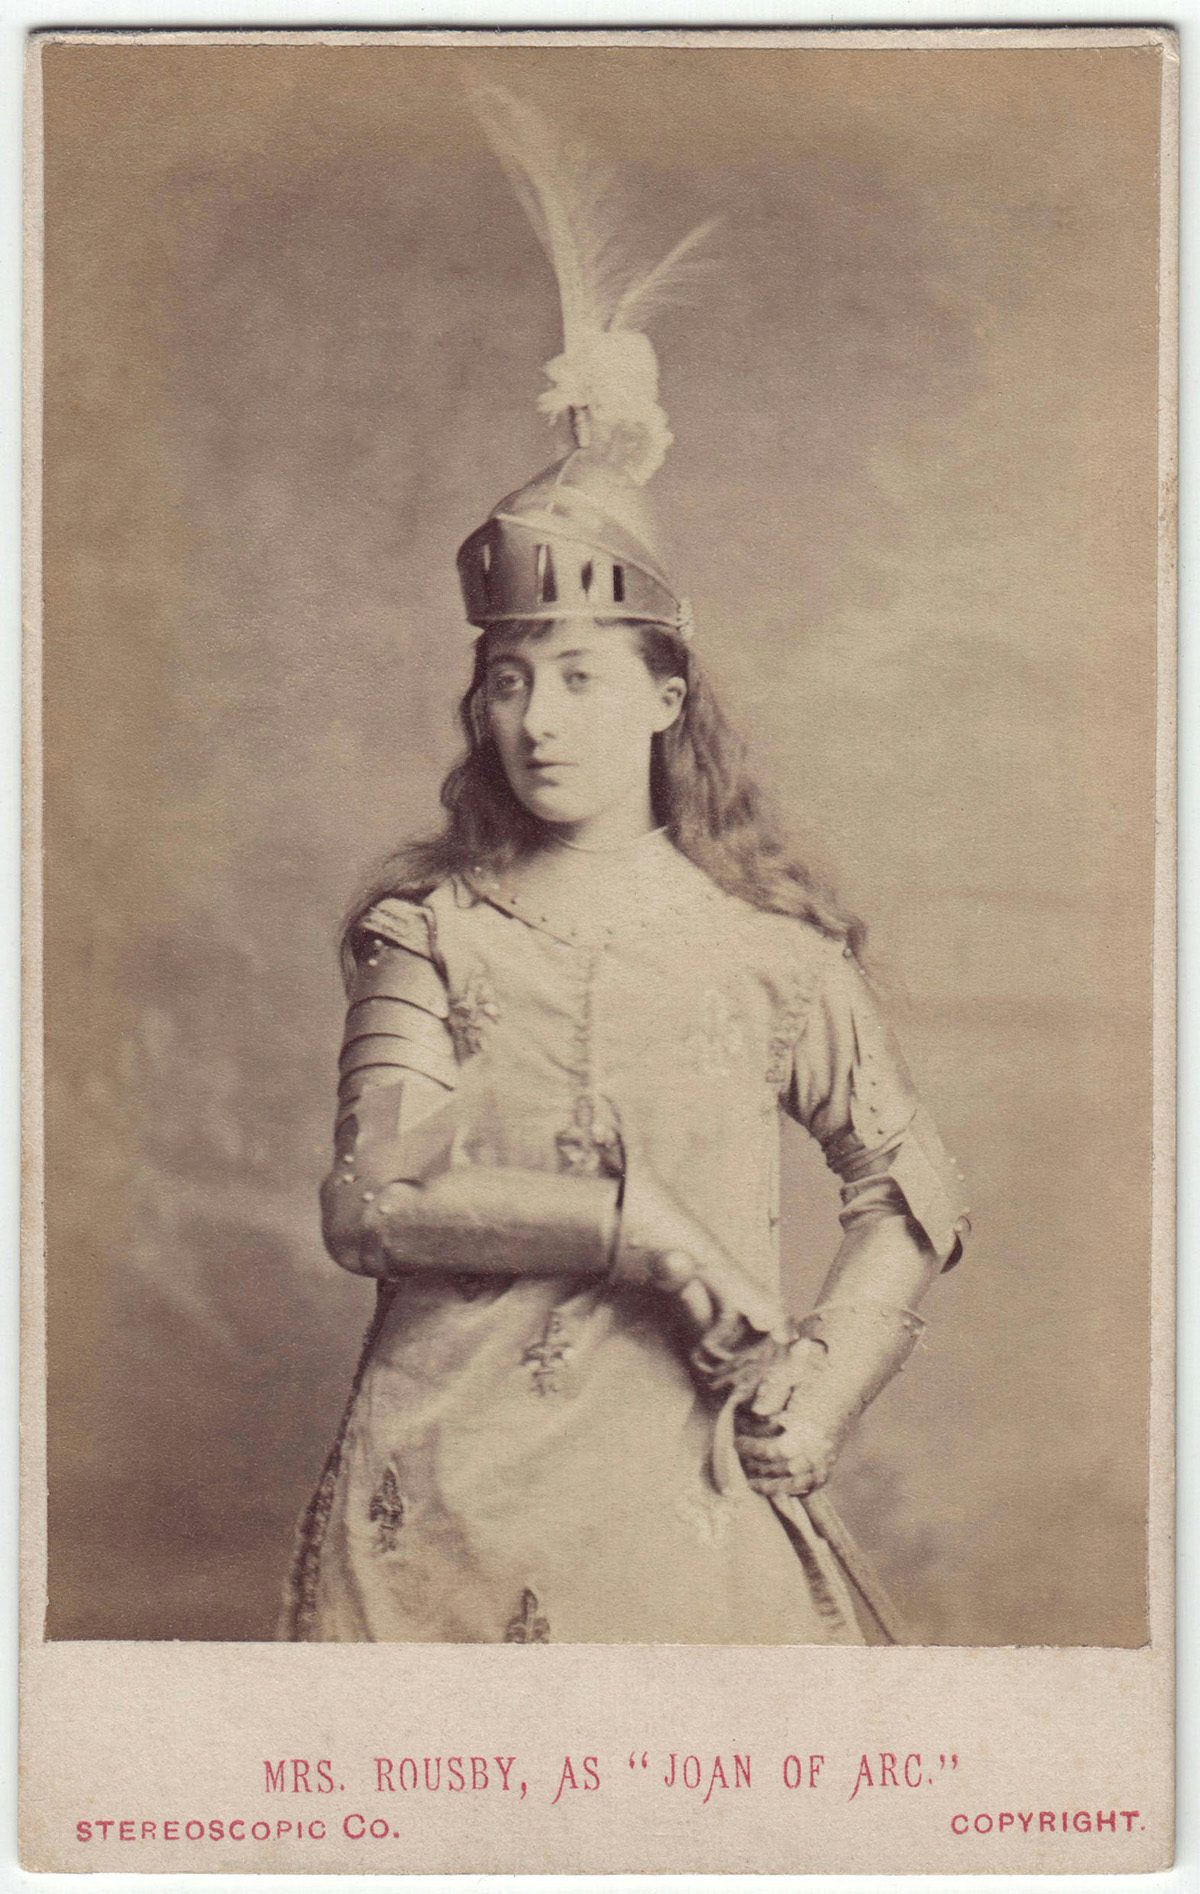 Sepia toned photo of a person with long hair wearing a head piece with feathers protruding from it